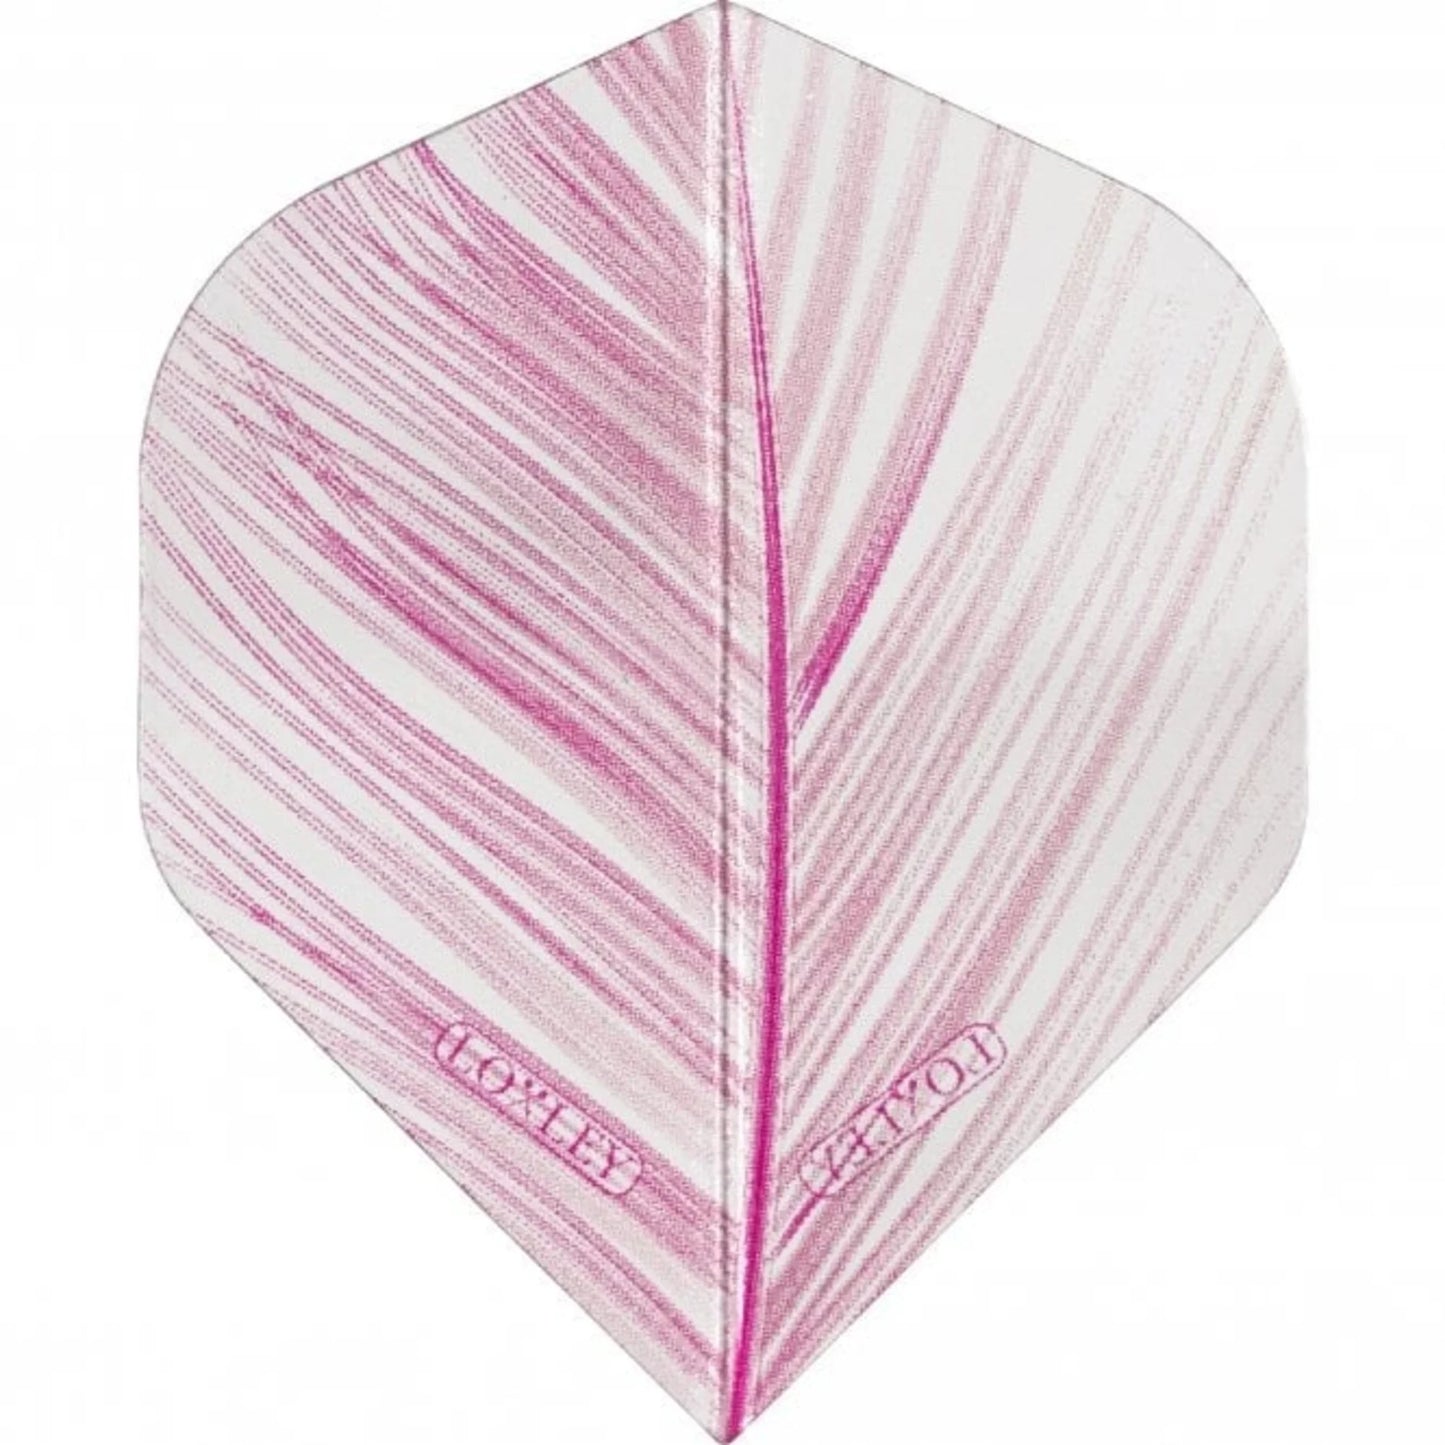 Loxley - Flights - Transparent Feather Pink No.2 - 10 sets